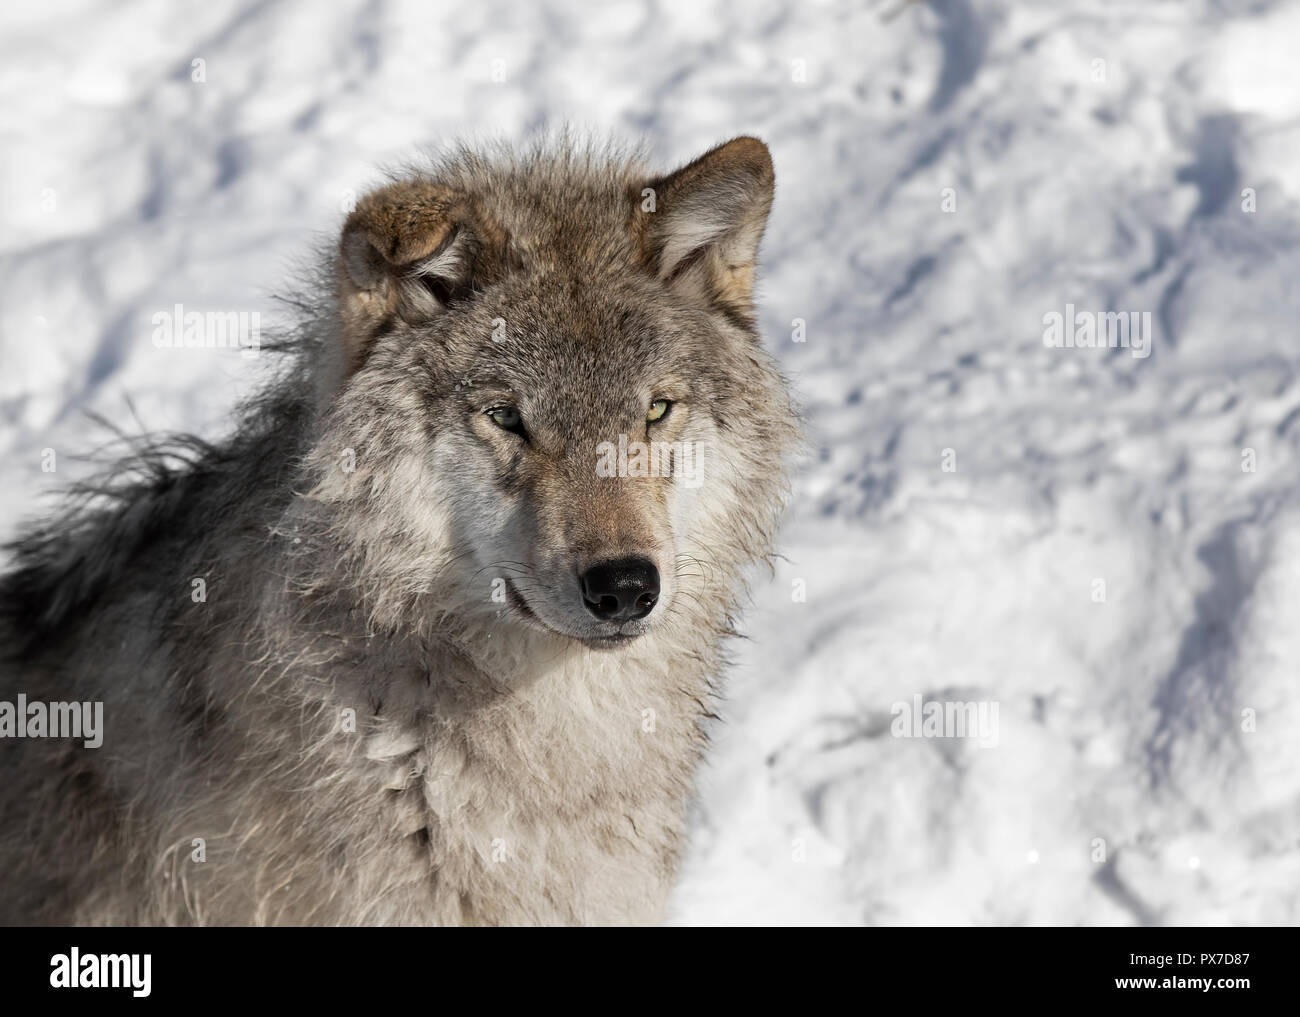 Timber wolf or Grey Wolf (Canis lupus) portrait closeup in winter snow in Canada Stock Photo